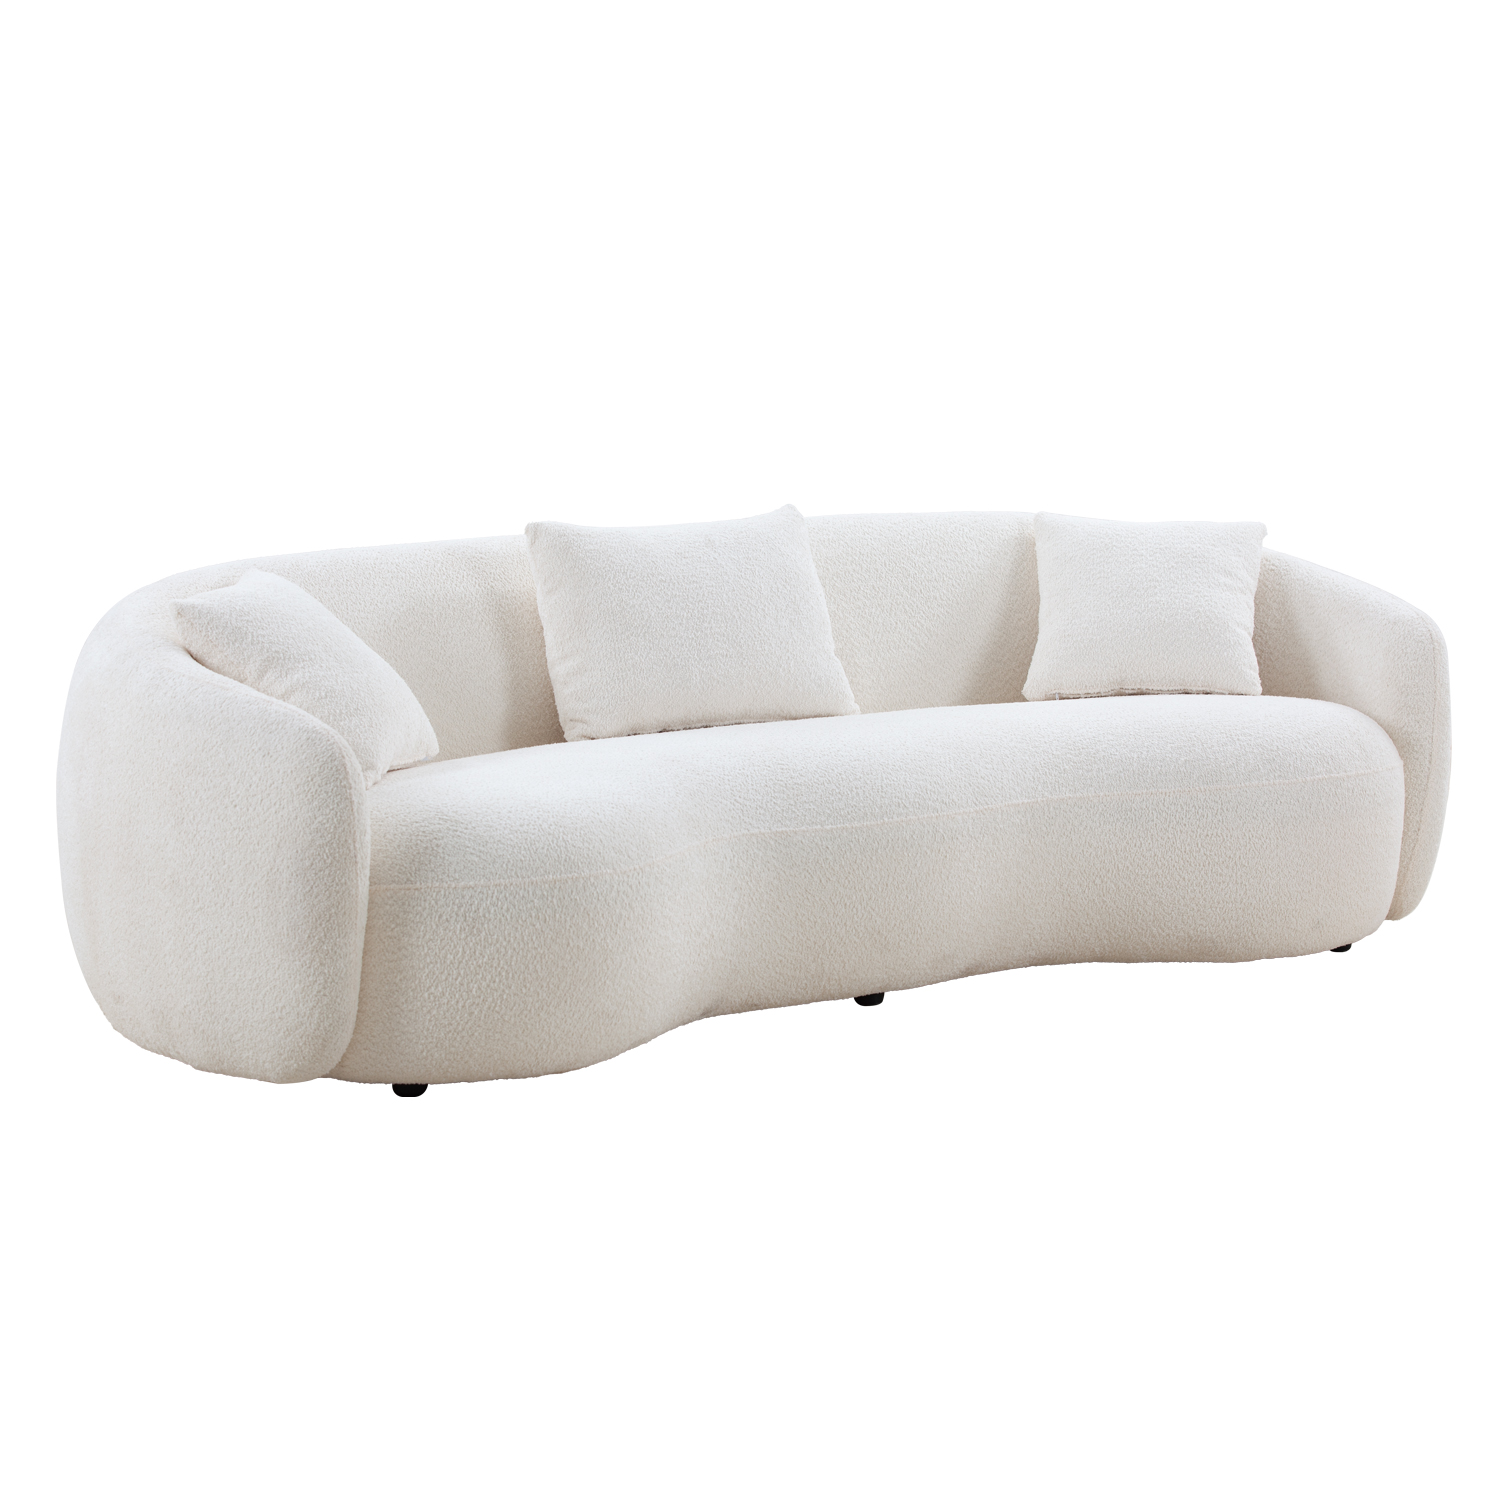 Mid Century Modern Curved Living Room Sofa, 4-Seat Boucle Fabric Couch for Bedroom, Office, Apartment, White